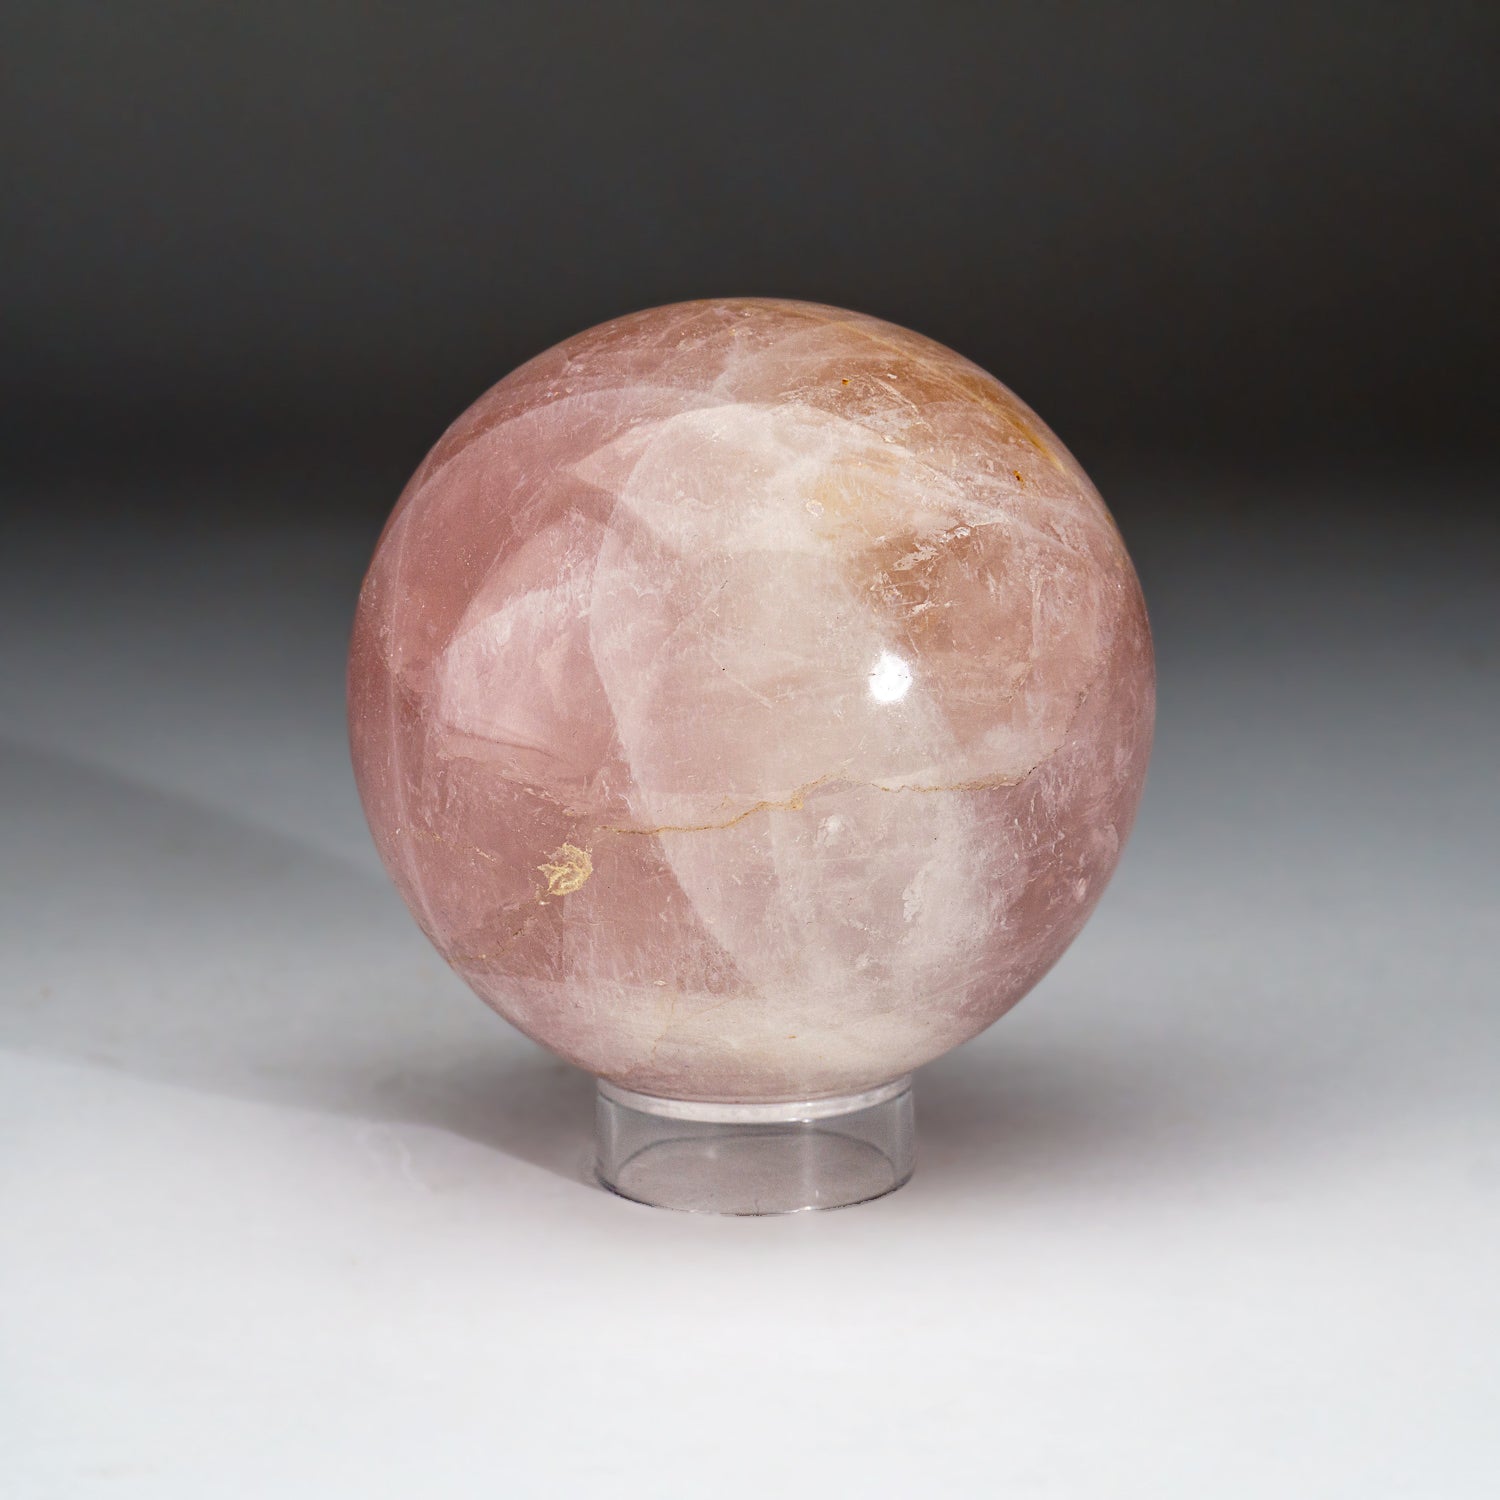 Polished Rose Quartz Sphere from Madagascar (1.4 lbs)